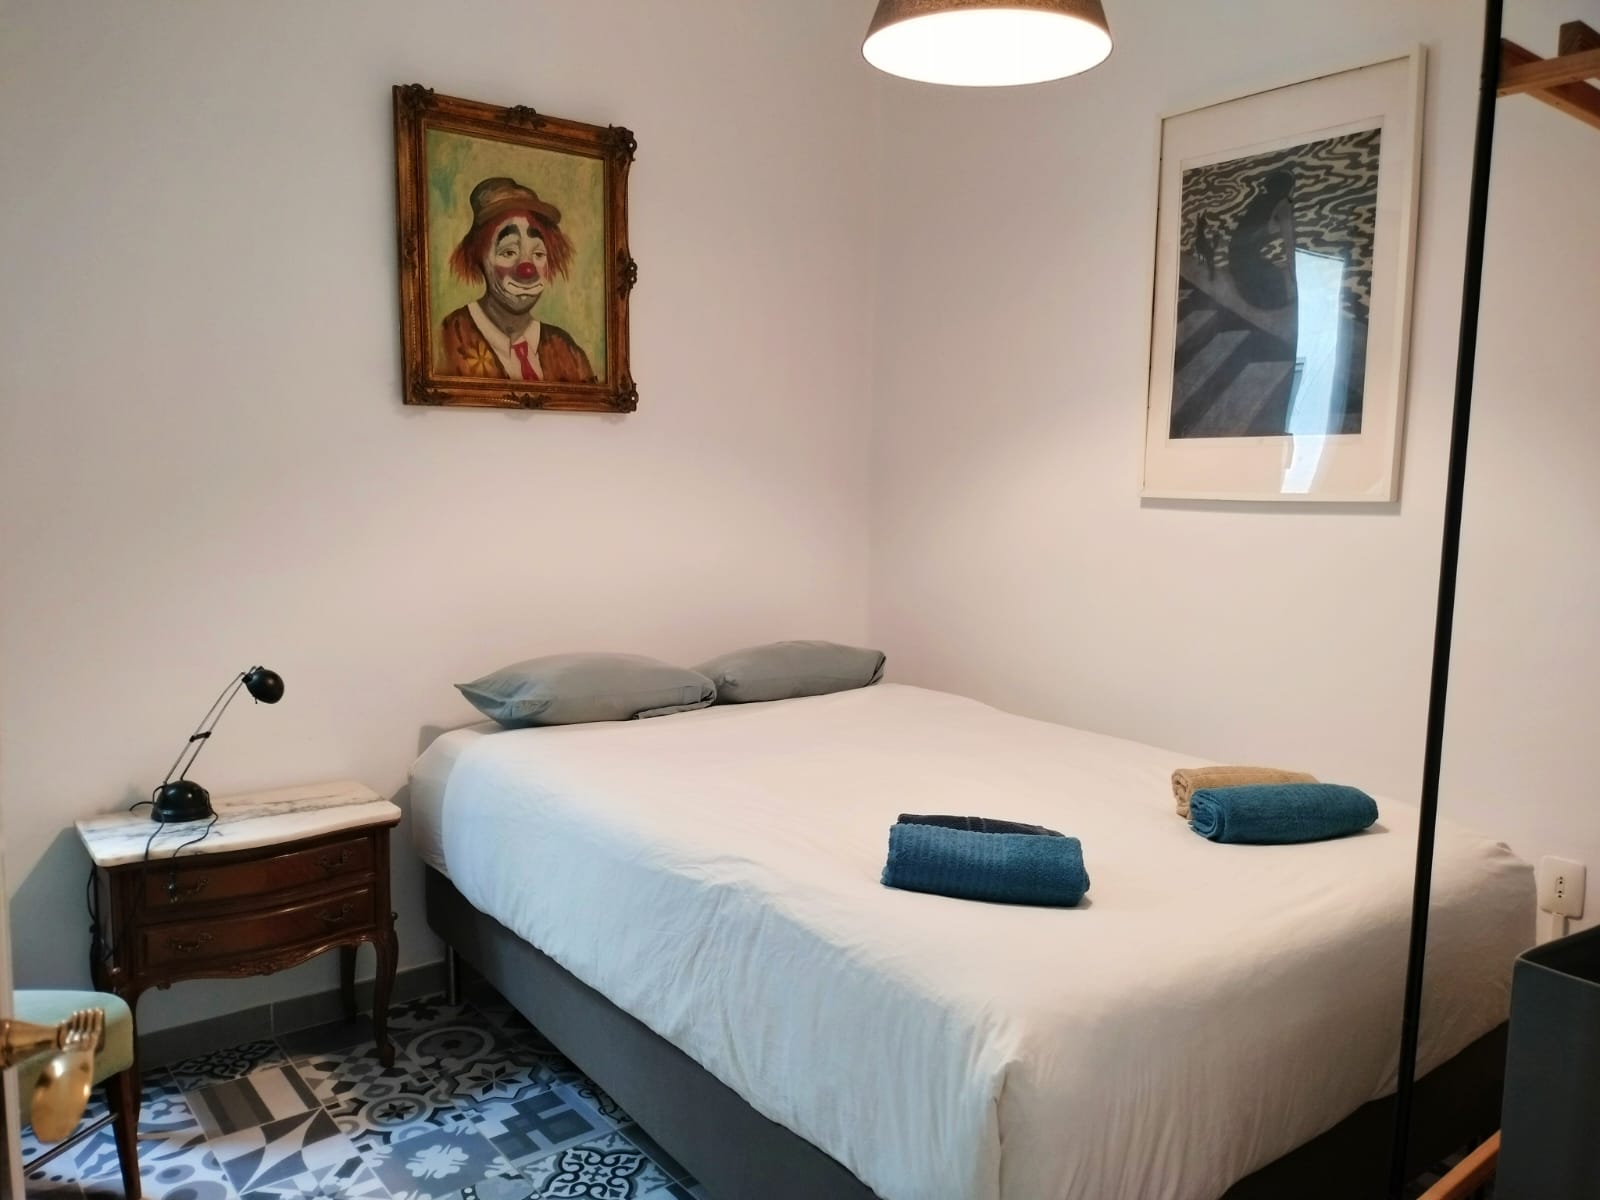 Literato Azorin - Lovely apartment for rent in Valencia